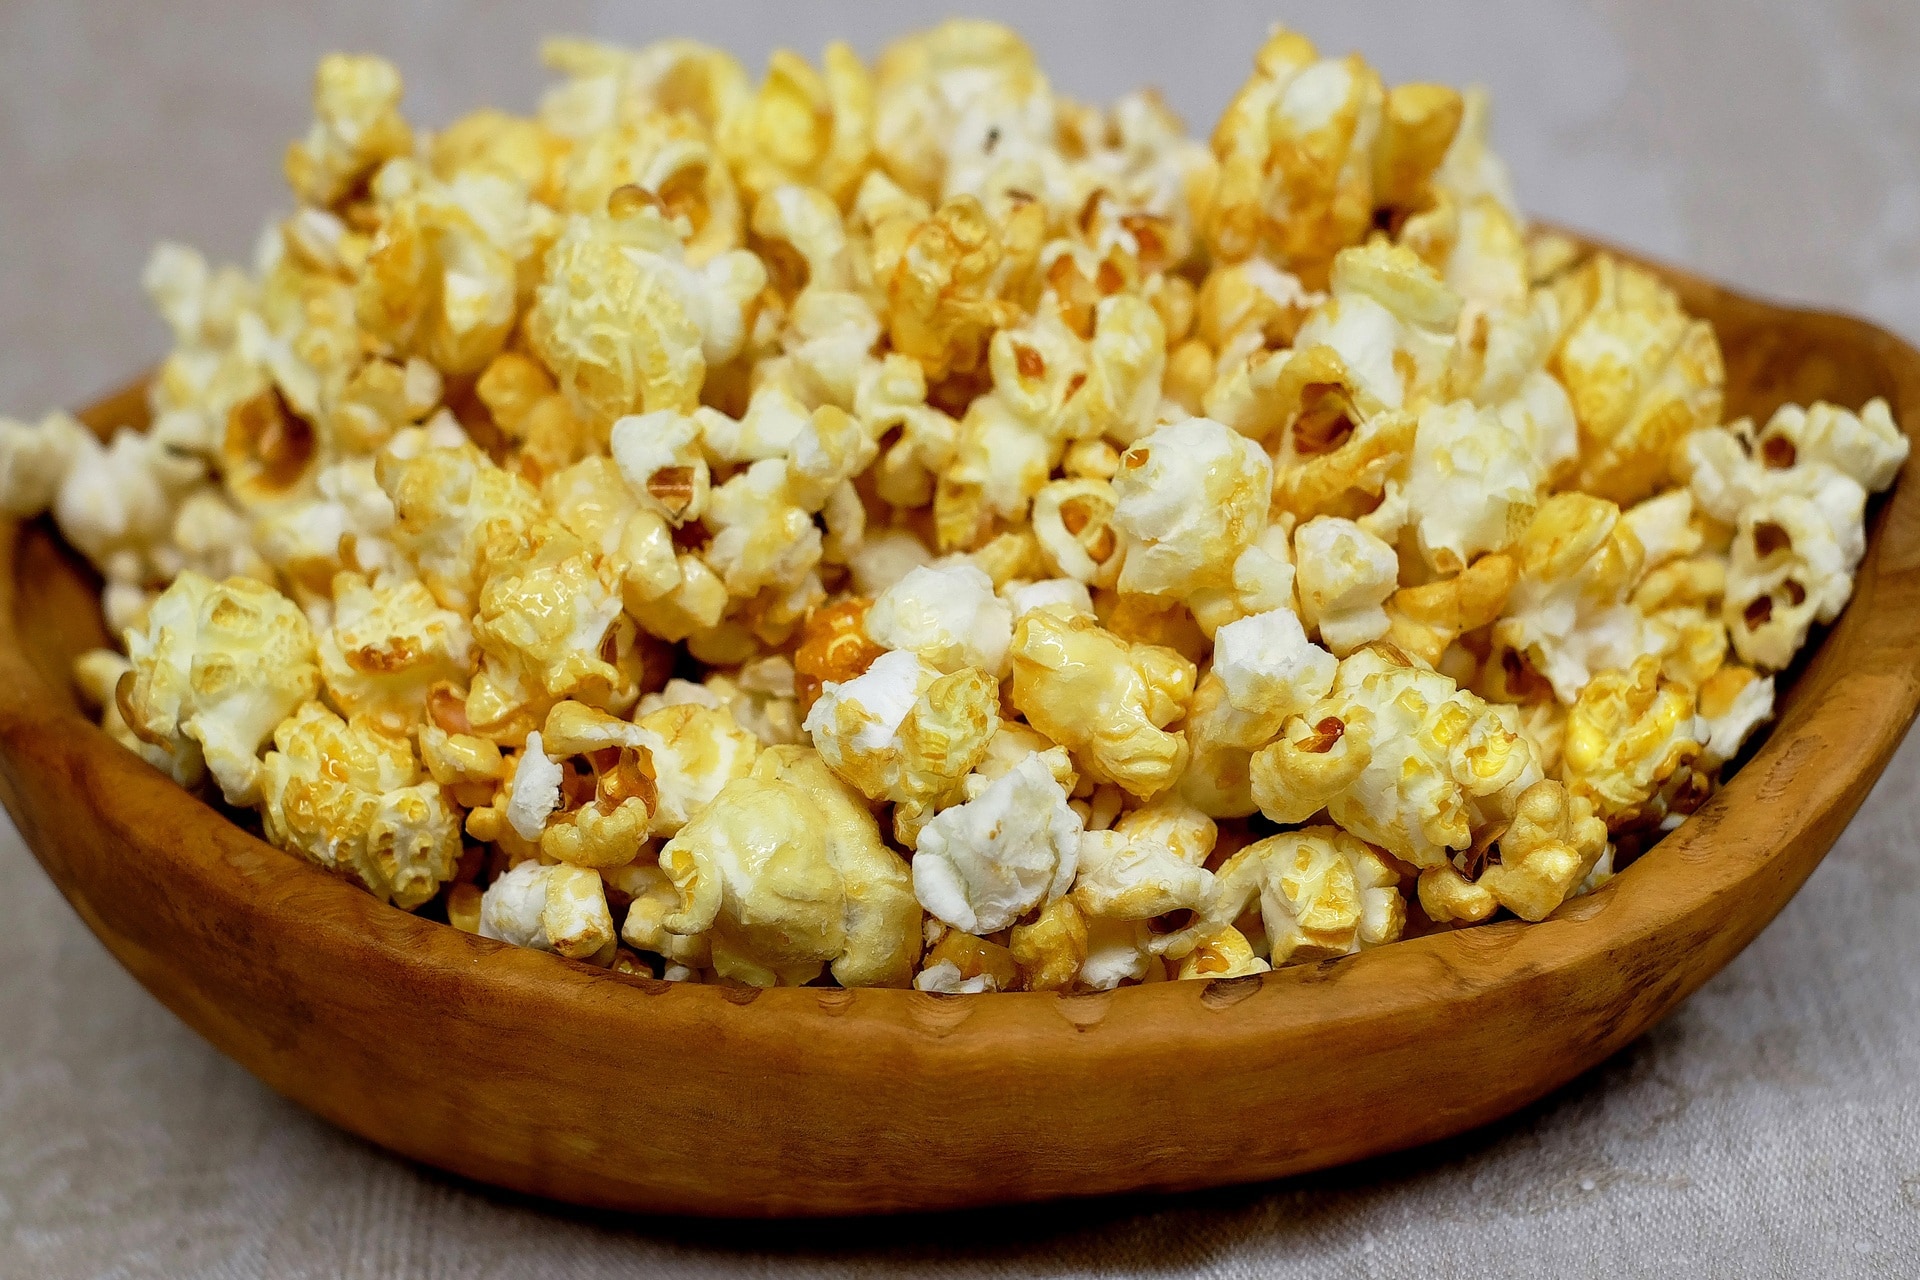 1920x1200 wallpaper | buttered popcorn with brown wooden bowl | Peakpx